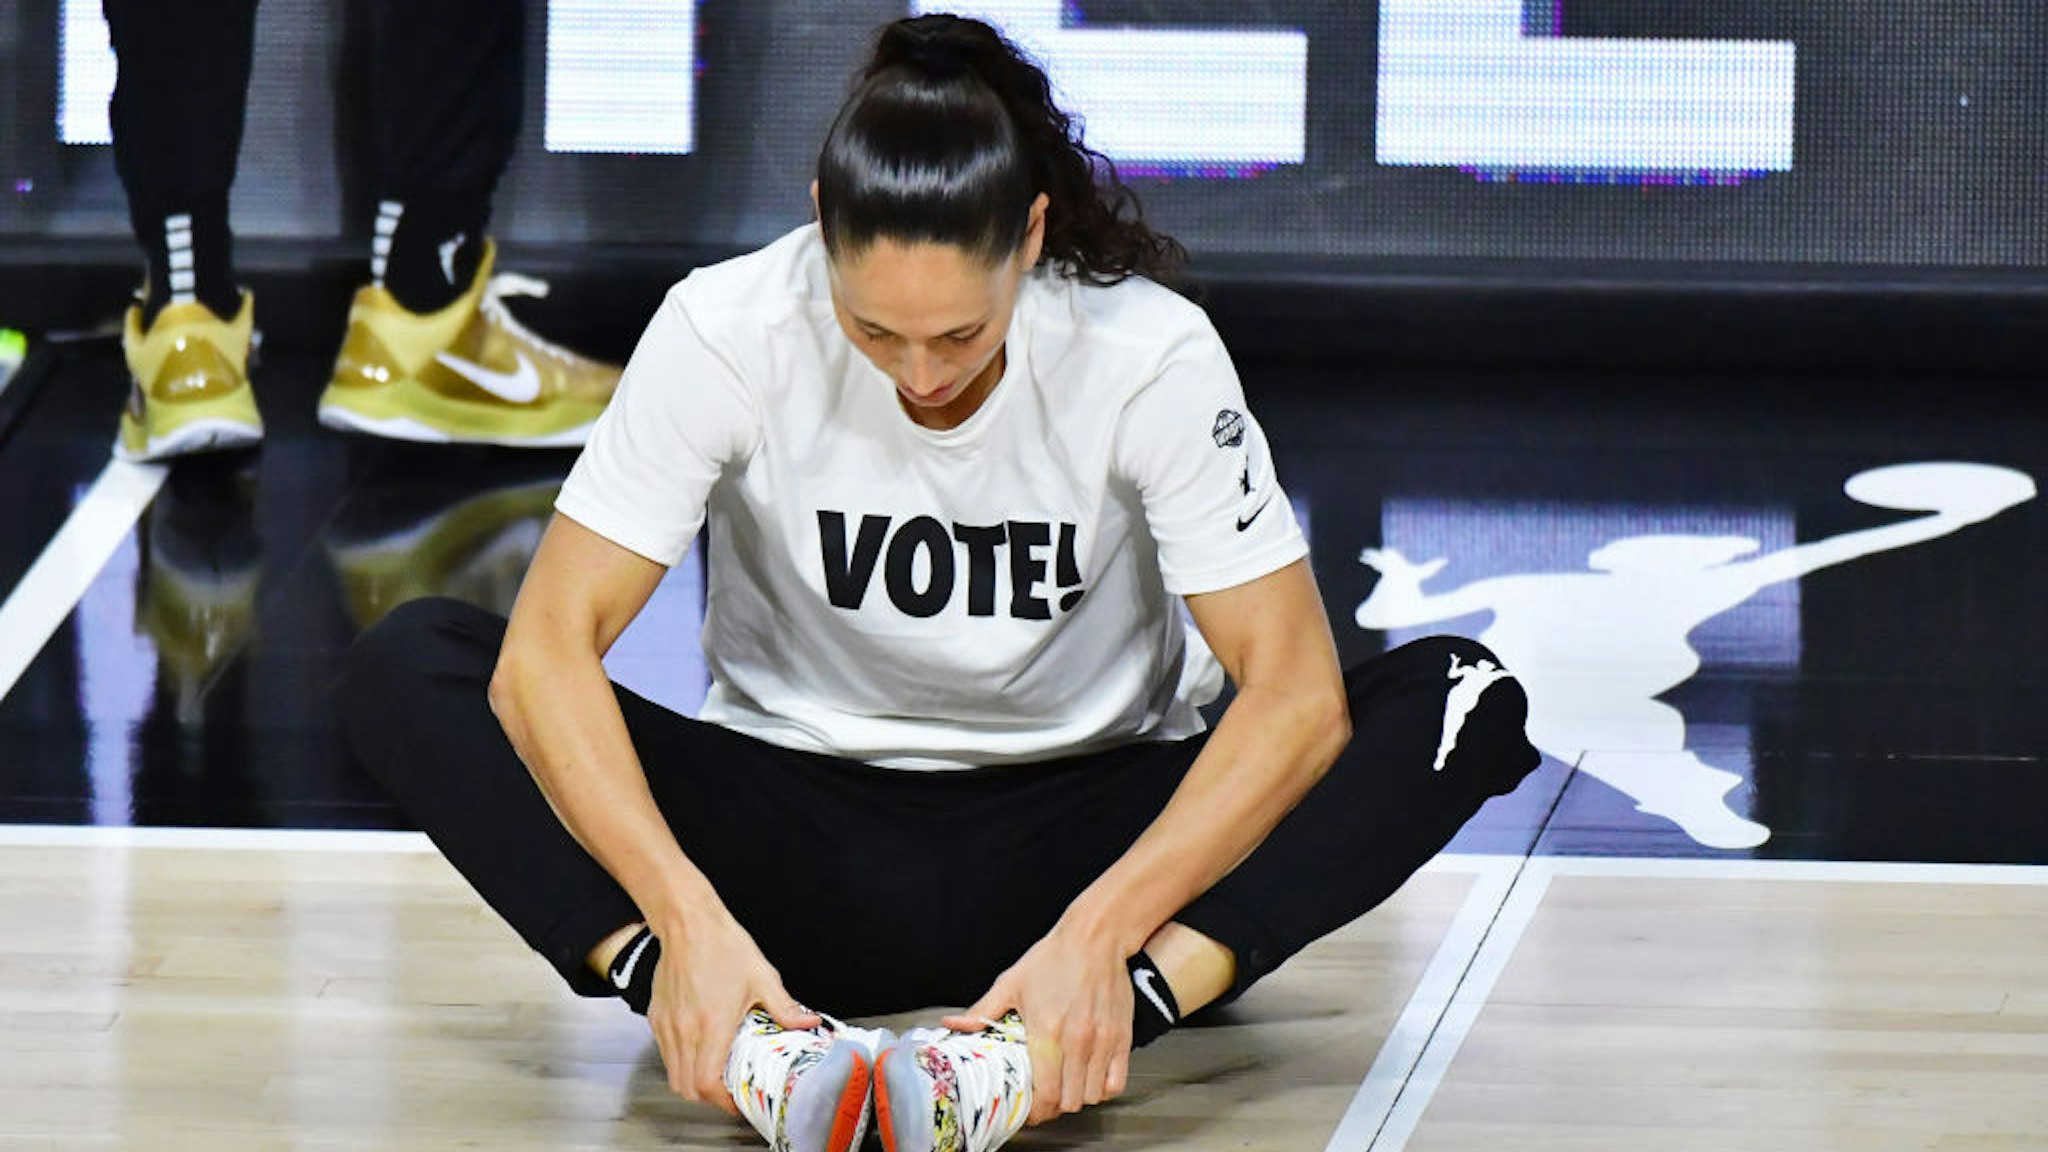 PALMETTO, FLORIDA - OCTOBER 06: Sue Bird #10 of the Seattle Storm stretches before Game 3 of the WNBA Finals against the Las Vegas Aces at Feld Entertainment Center on October 06, 2020 in Palmetto, Florida. NOTE TO USER: User expressly acknowledges and agrees that, by downloading and or using this photograph, User is consenting to the terms and conditions of the Getty Images License Agreement.